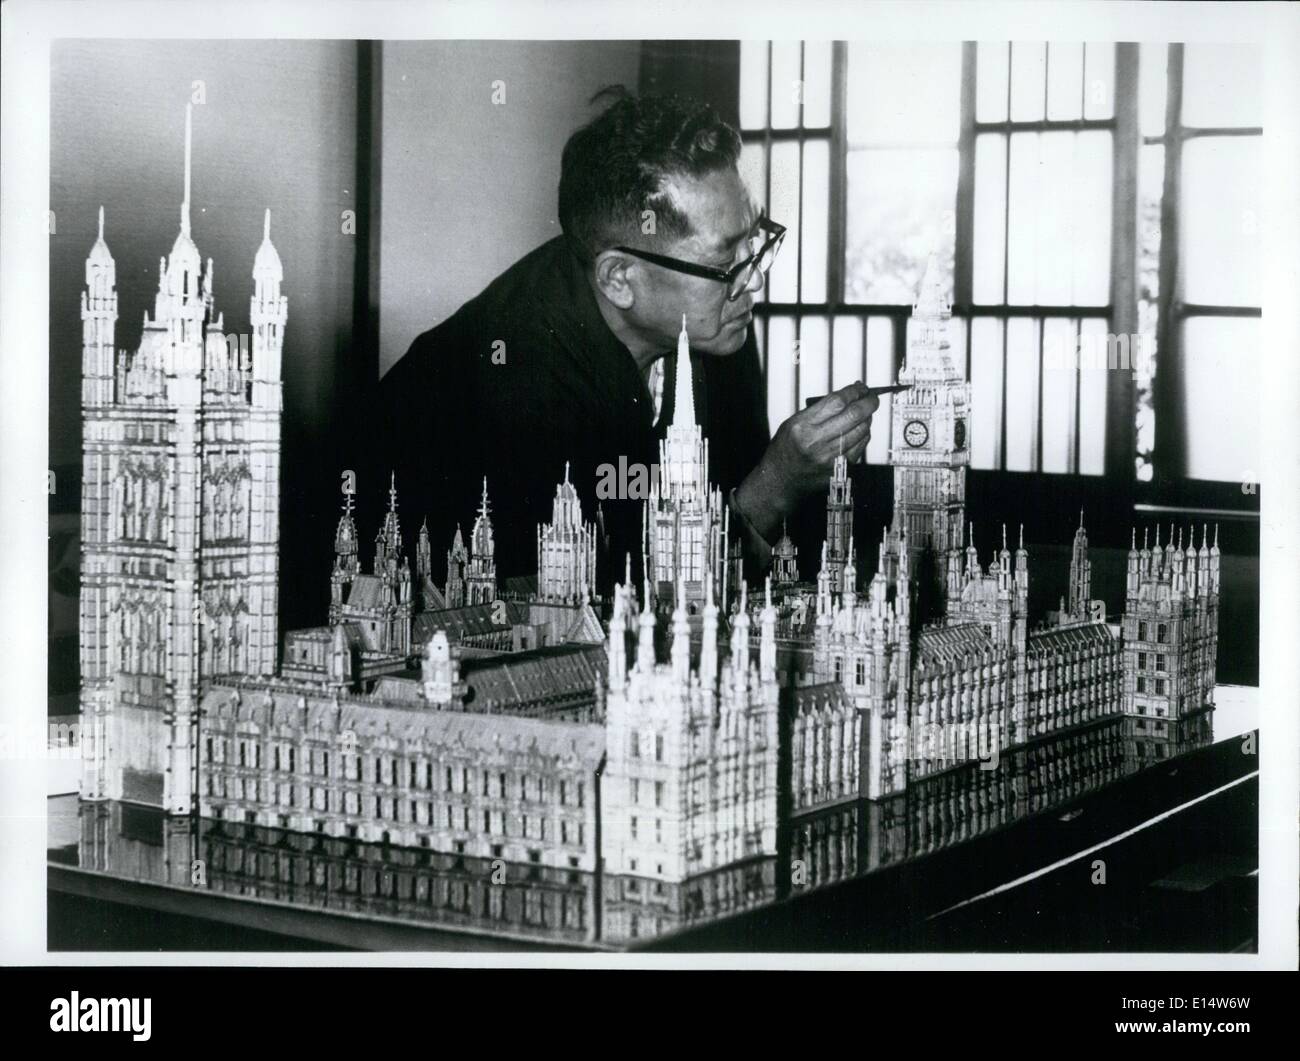 Apr. 18, 2012 - World's Largest-- In Tokyo, Japan, Kiyoshi Yamamoto spent almost a year and a half completing his miniature version of London's Houses of Parliament. There are over 50,000 used match sticks in his replica, which is considered the largest collection in the world to be used for this purpose. Stock Photo